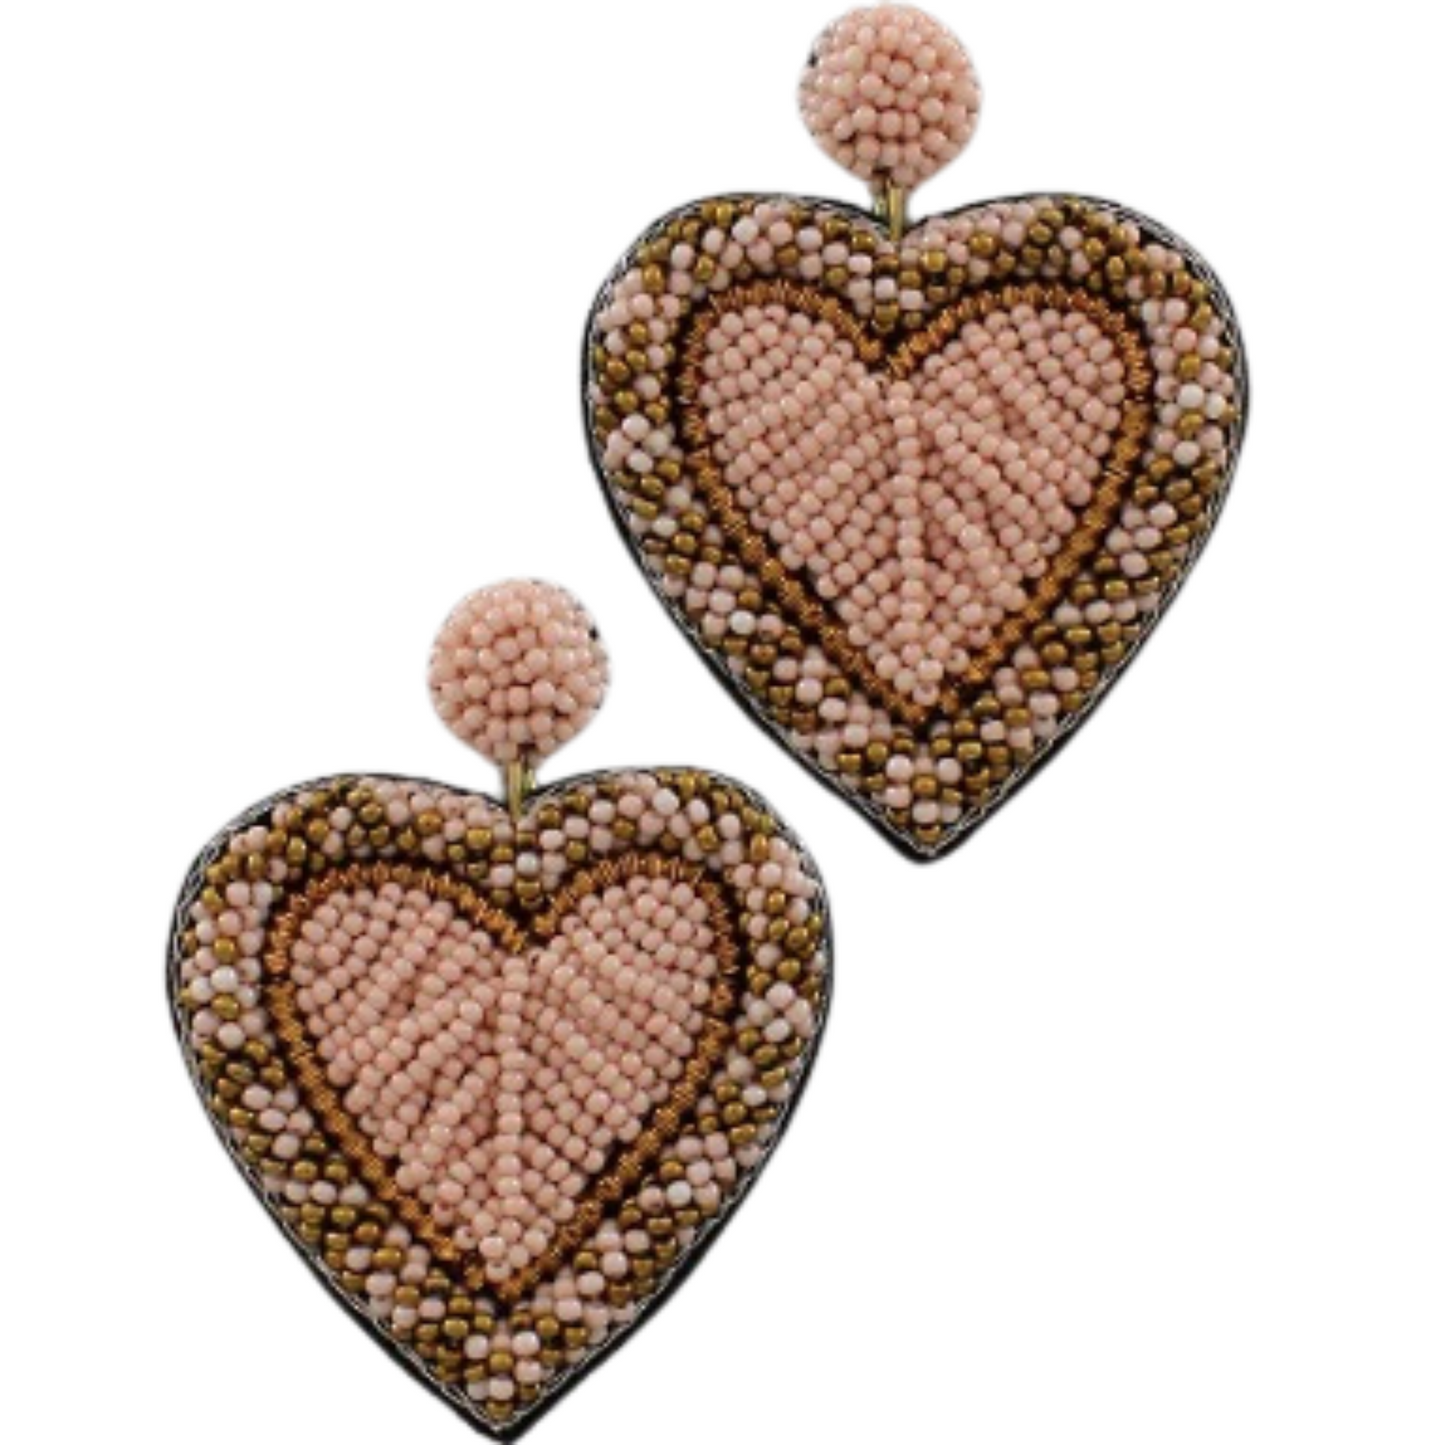 Discover the perfect balance of whimsy and elegance with our Seed Bead Heart Earrings. These dainty dangle earrings feature handcrafted seed beads in a charming pink and gold color combination, making them the perfect accessory for any occasion. Add a touch of playful sophistication to your look with these delightful earrings.